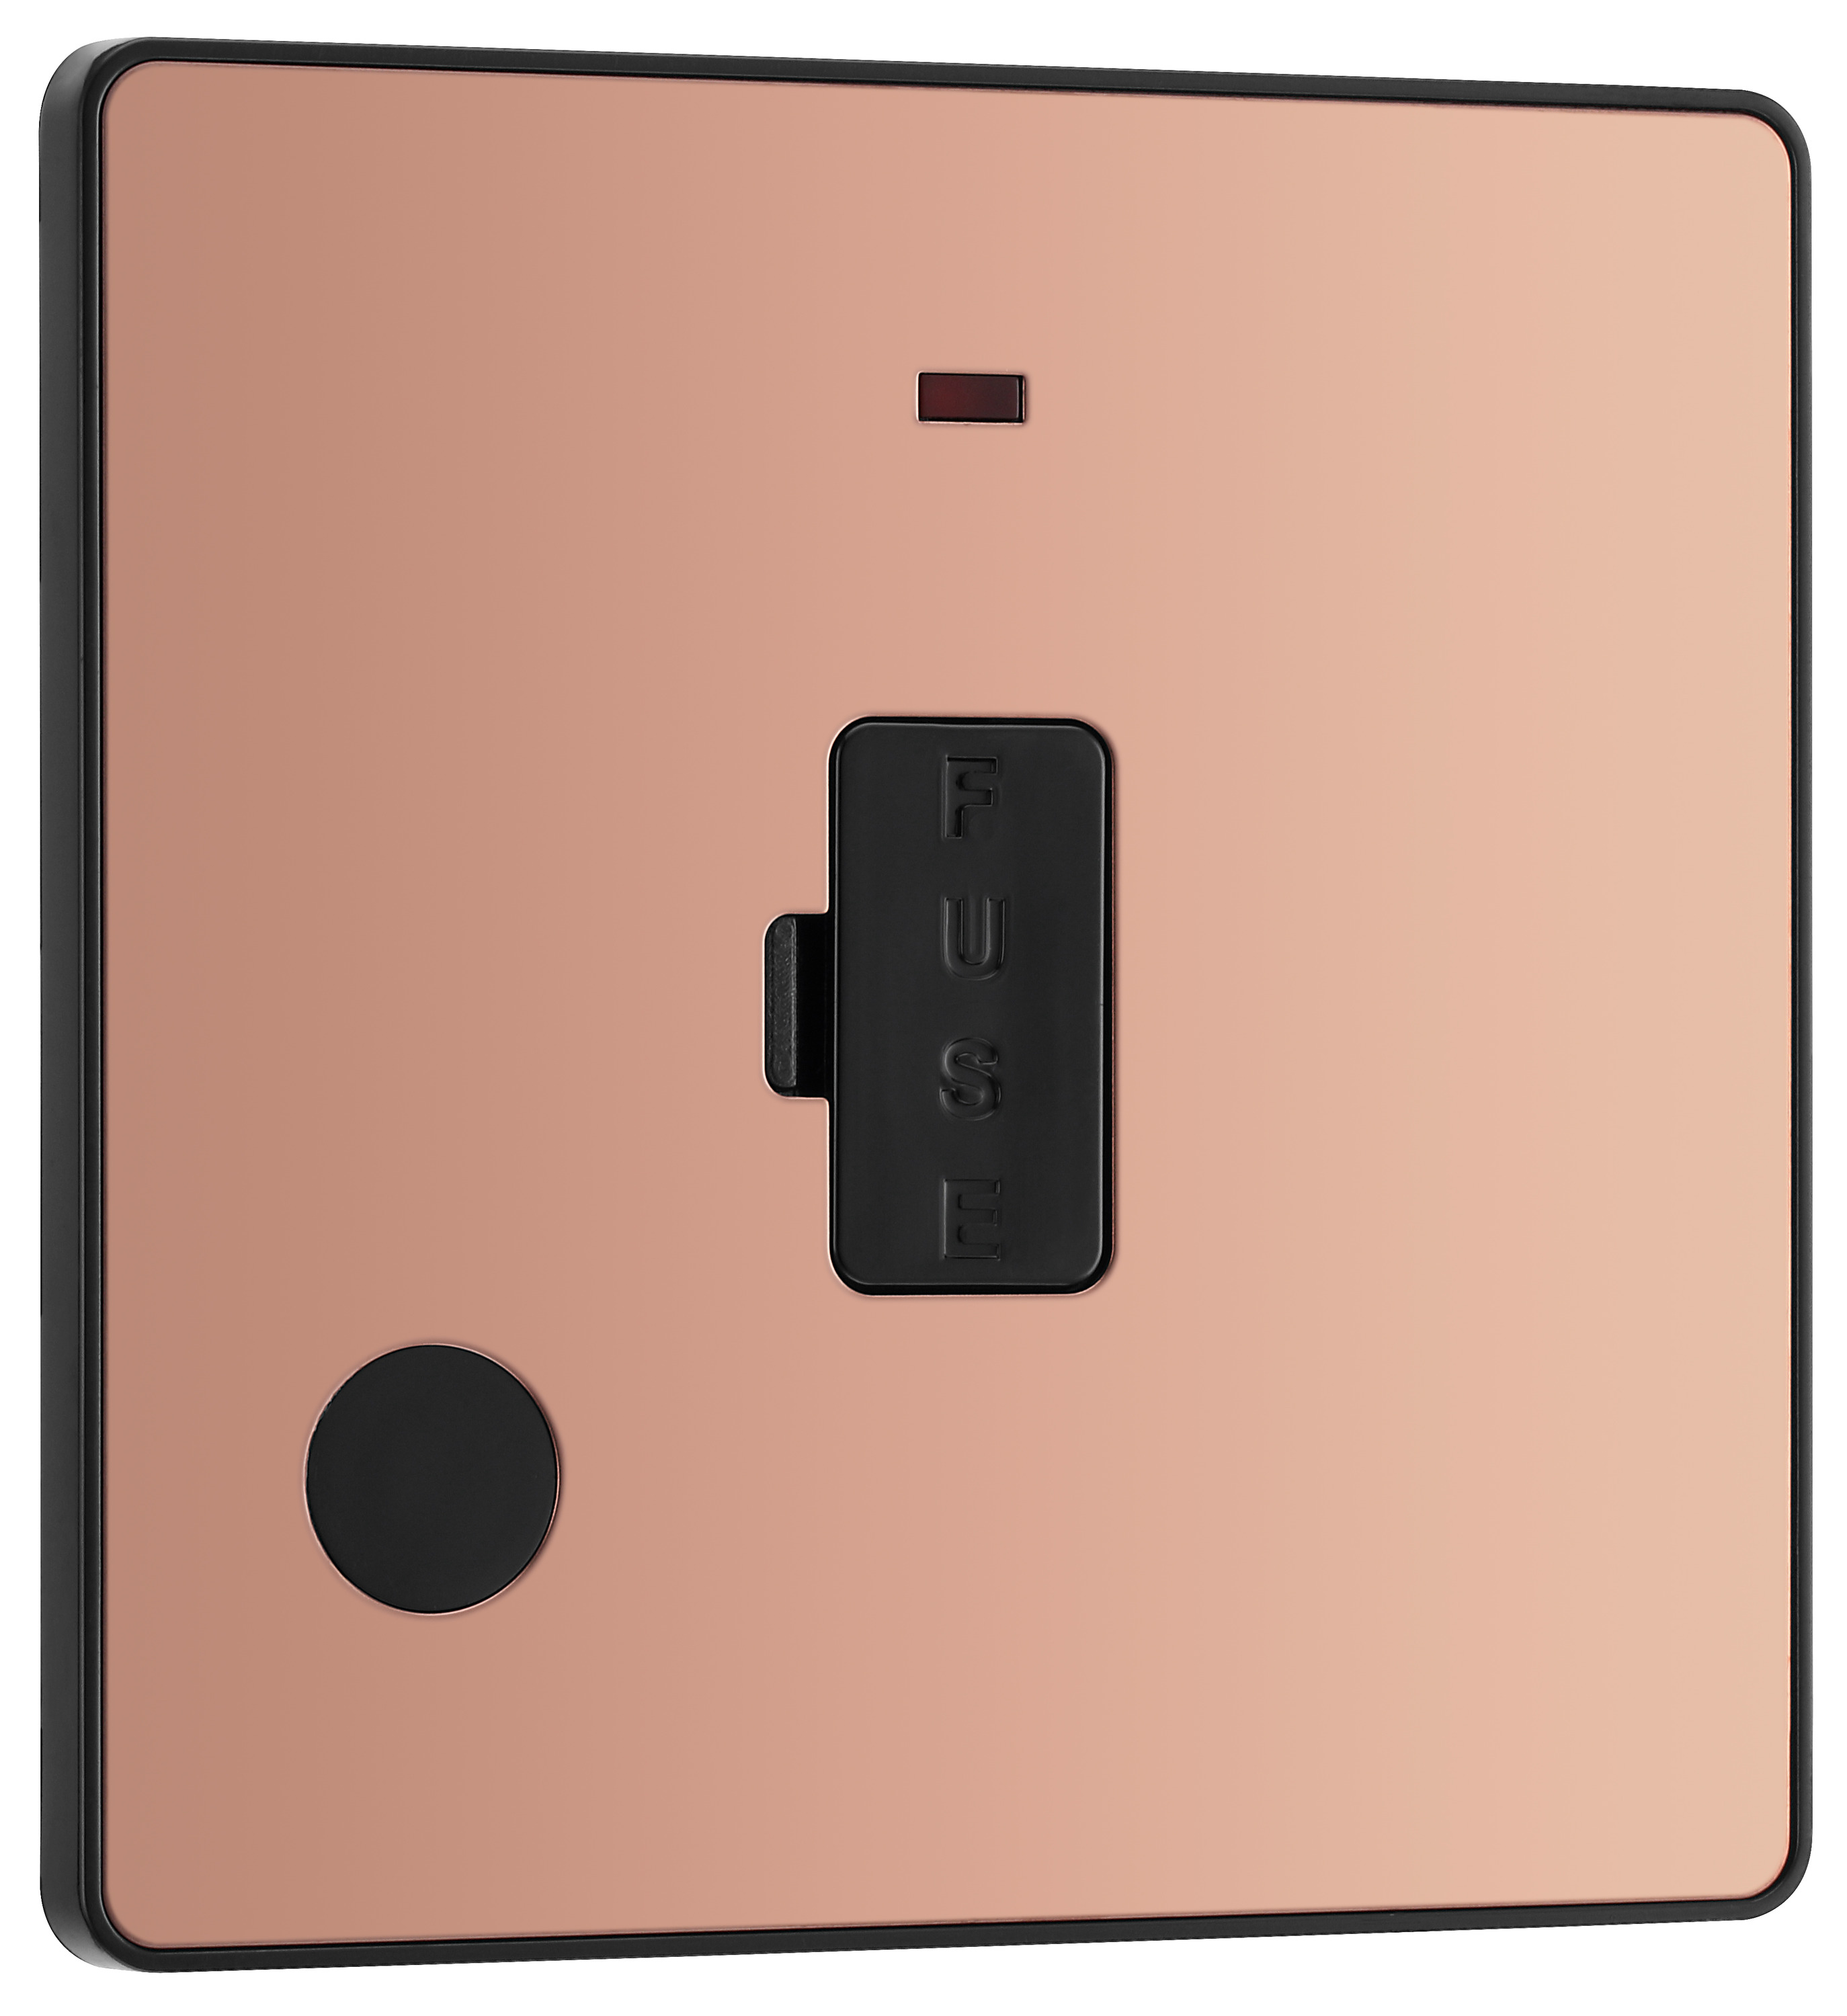 Image of BG Evolve Polished Copper 13A Unswitched Fused Connection Unit with Power Led Indicator & Flex Outlet